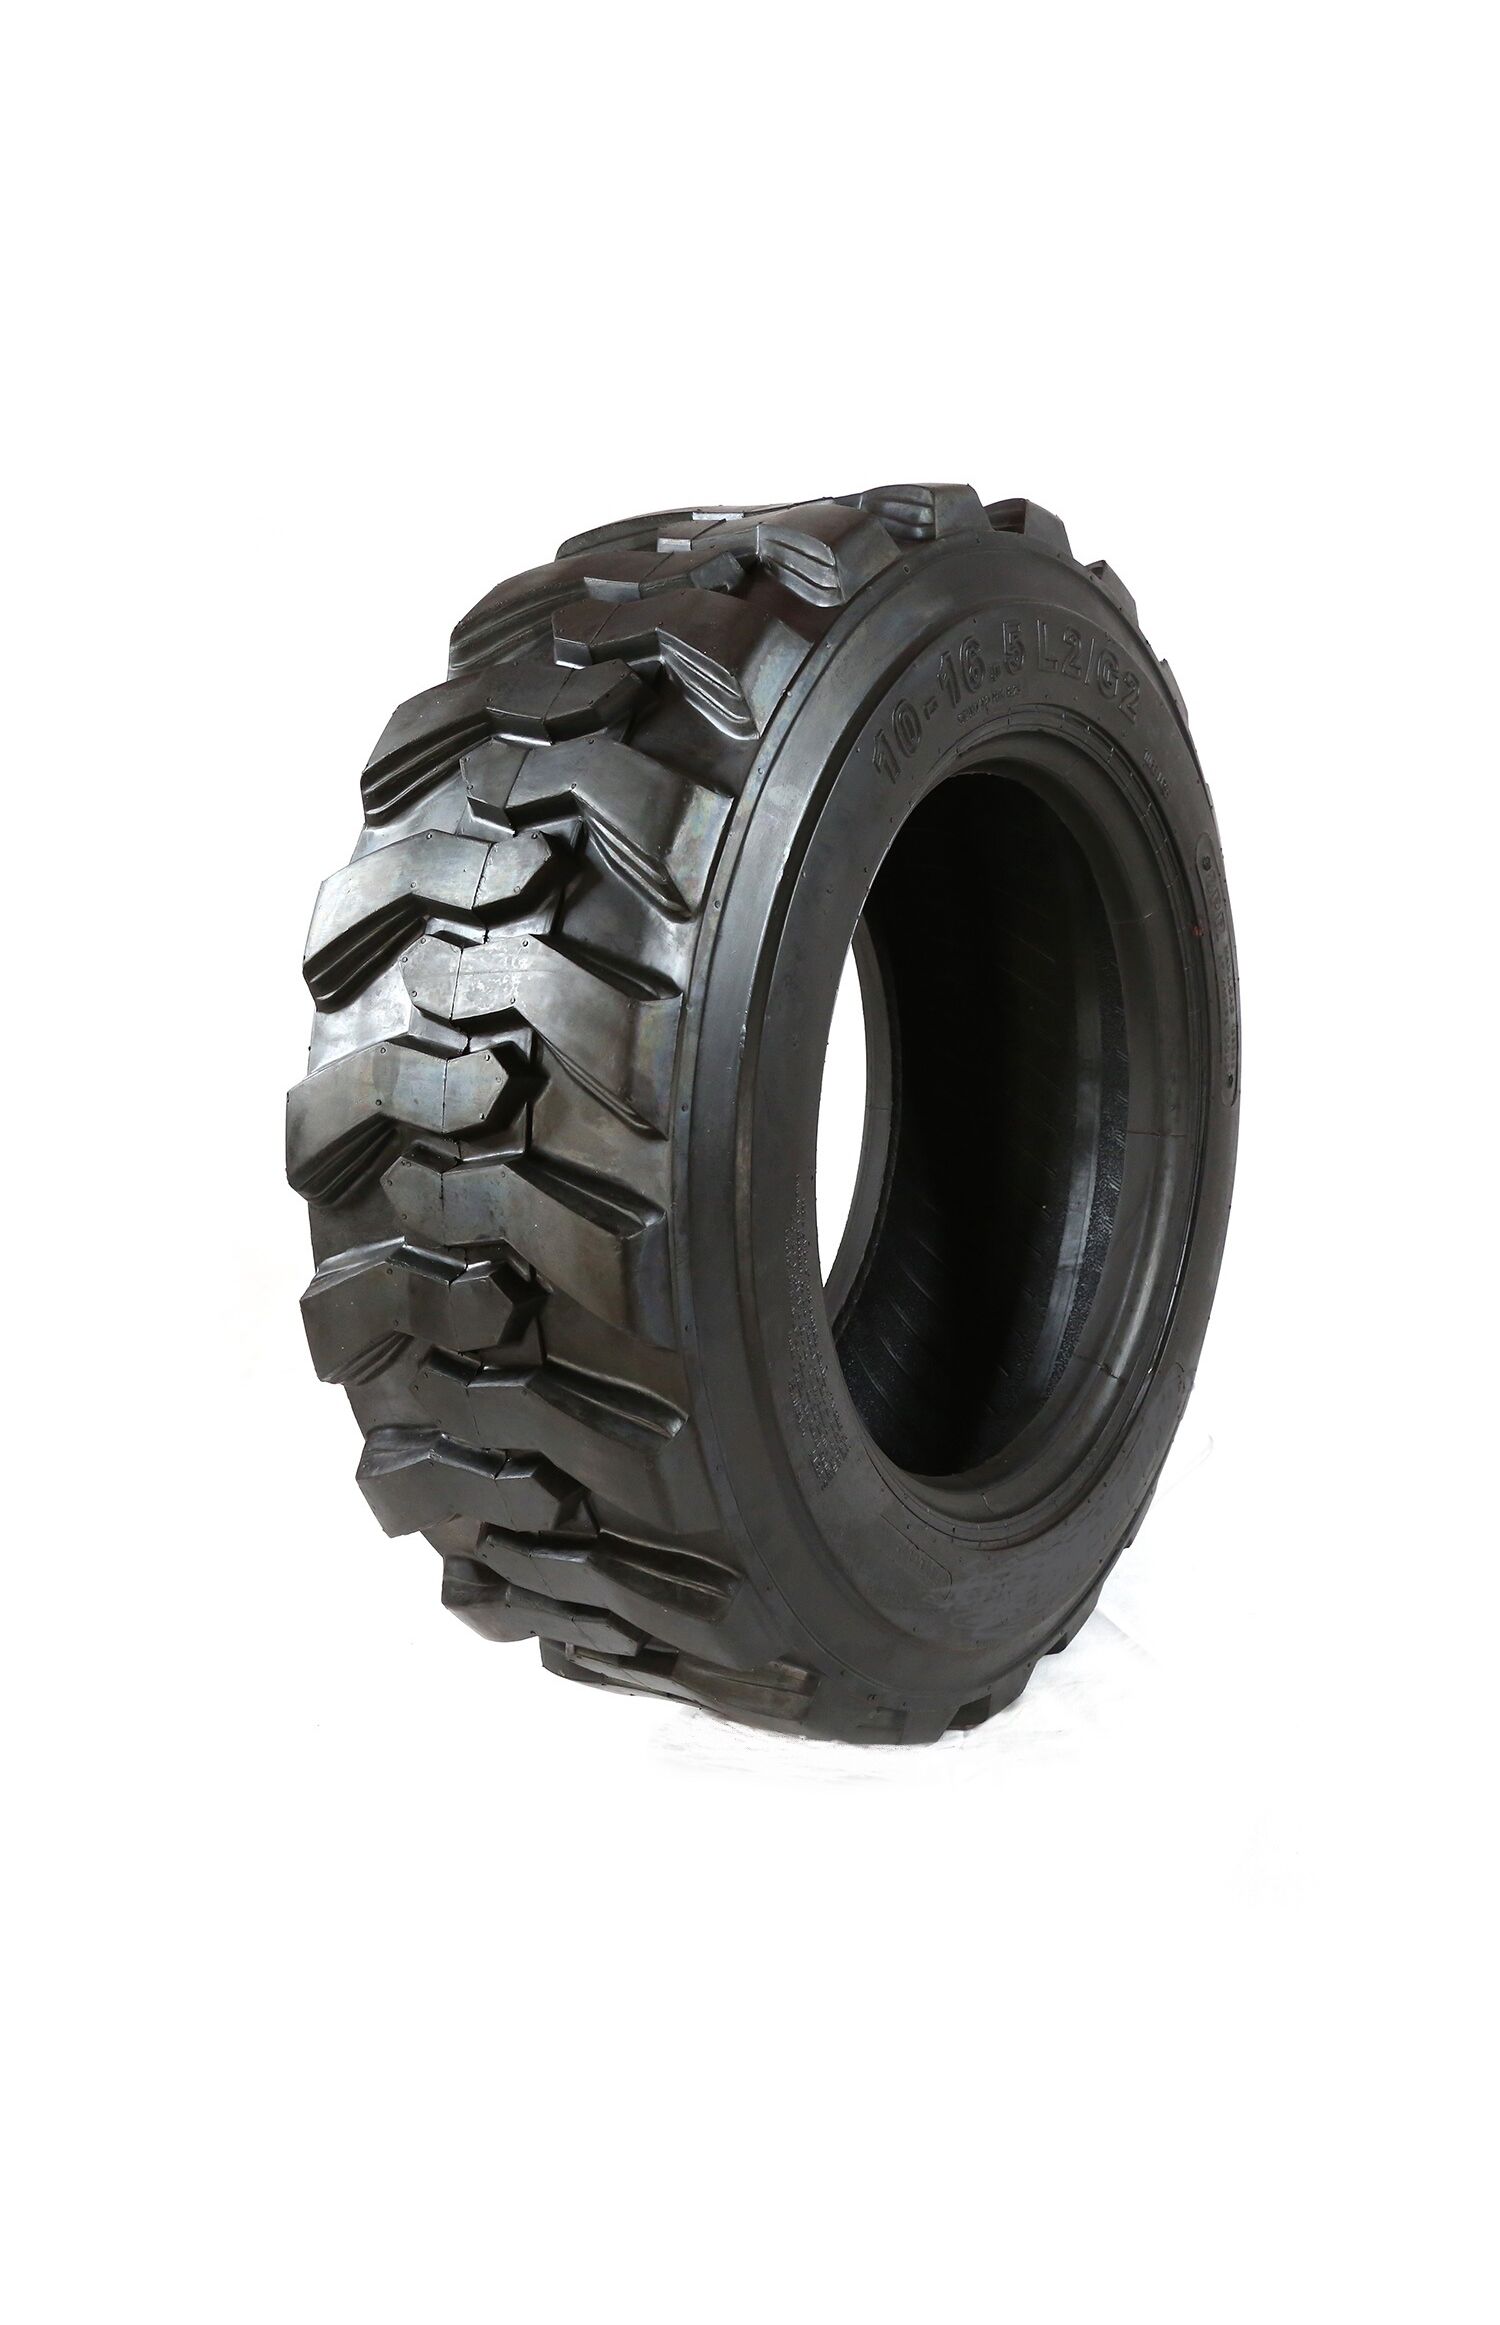 One HORSESHOE 10-16.5 Skid Steer Loader Tubeless Tire w/Rim Guard 14 Ply Rating Heavy Duty G Load 10x16.5 NHS SKS1 L2/G2 T168 